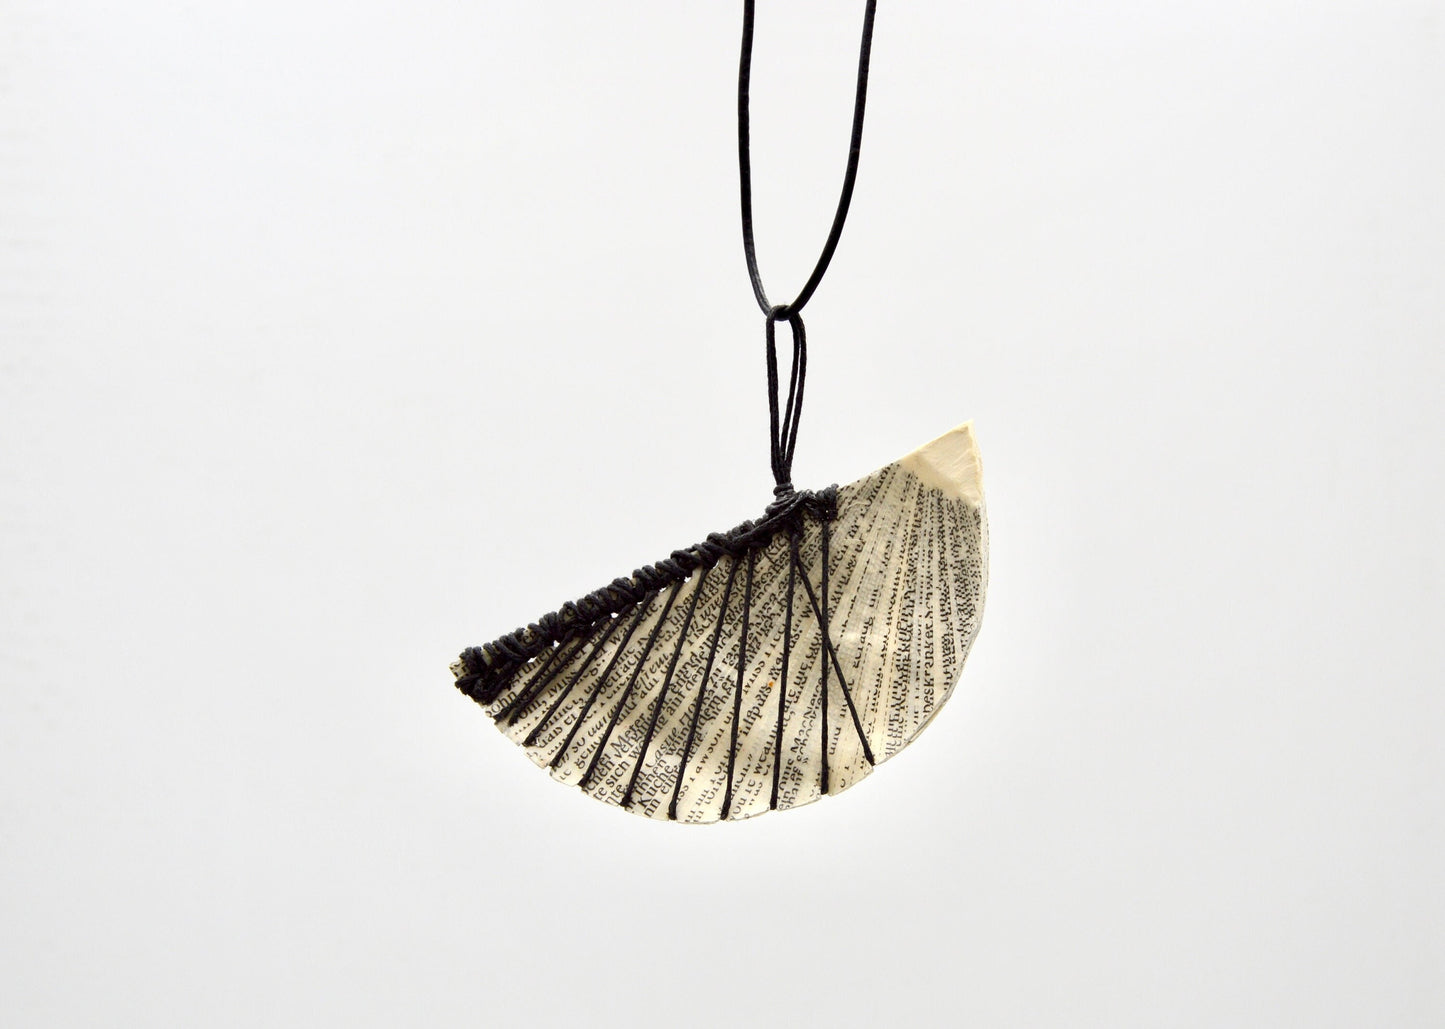 Half round book pendant - made of Book Pages - Art Paper necklace